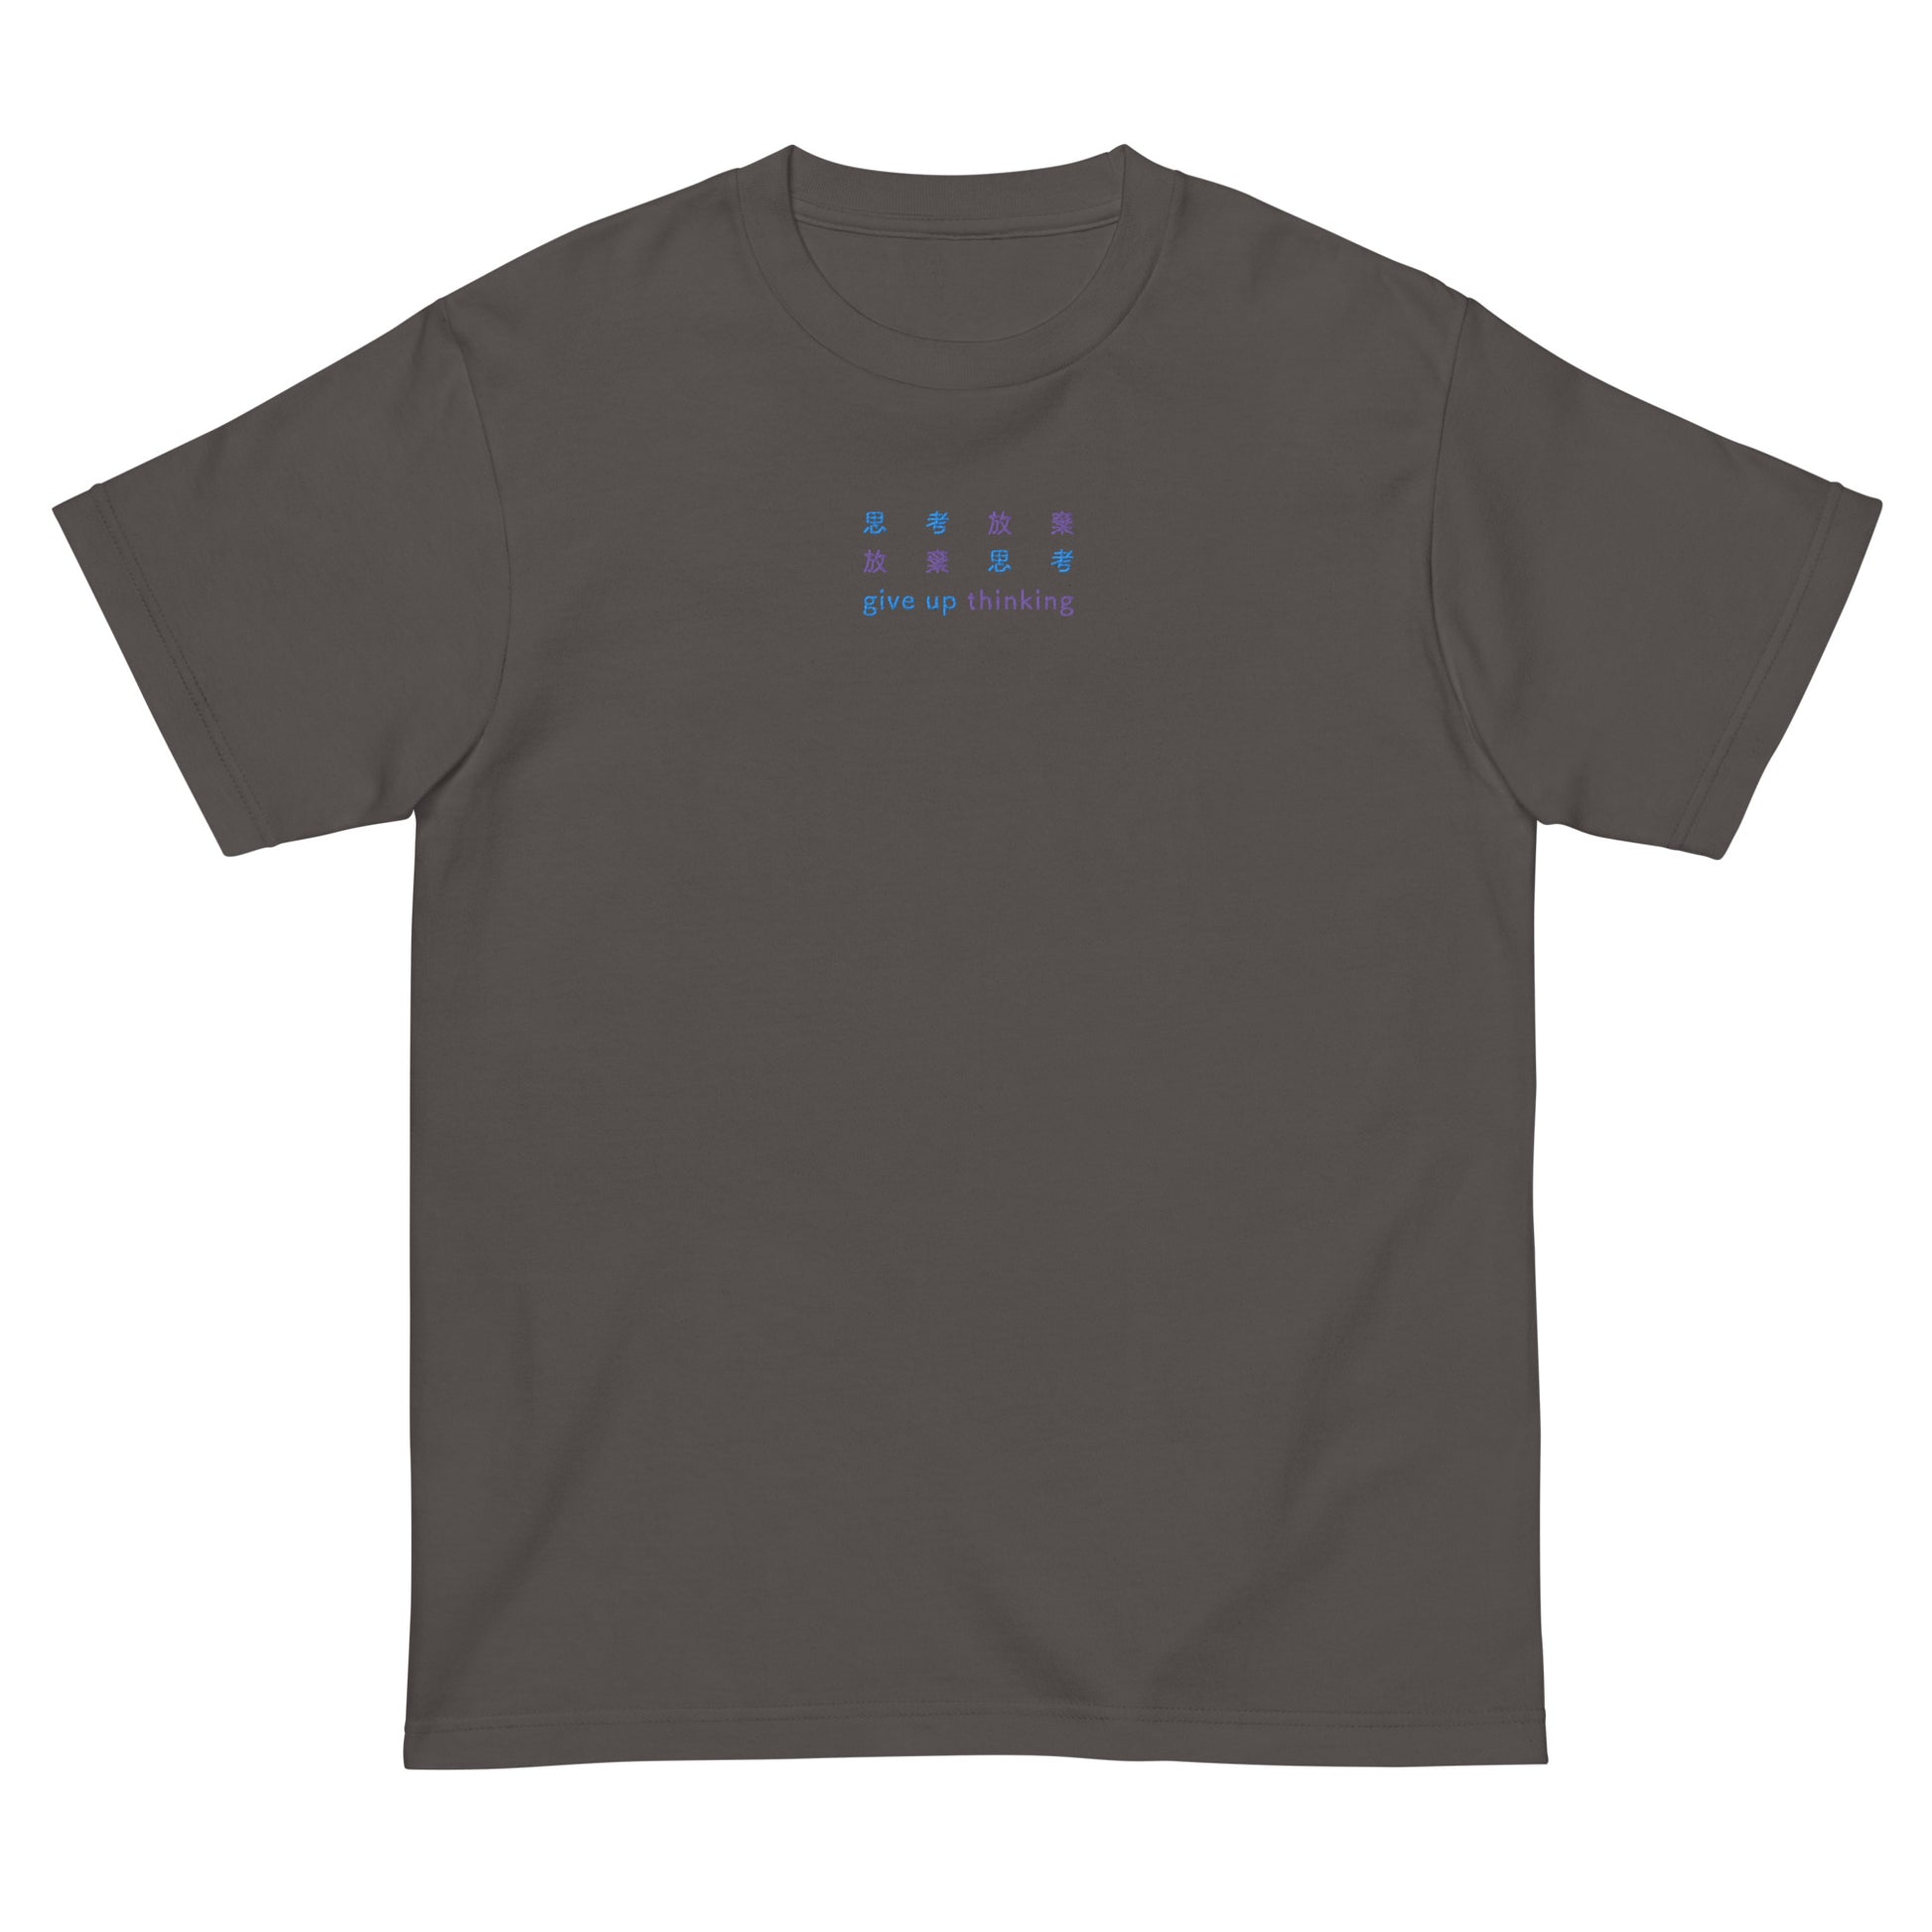 Dark Gray High Quality Tee - Front Design with an Light Blue, Purple Embroidery "Give Up Thinking" in Japanese,Chinese and English